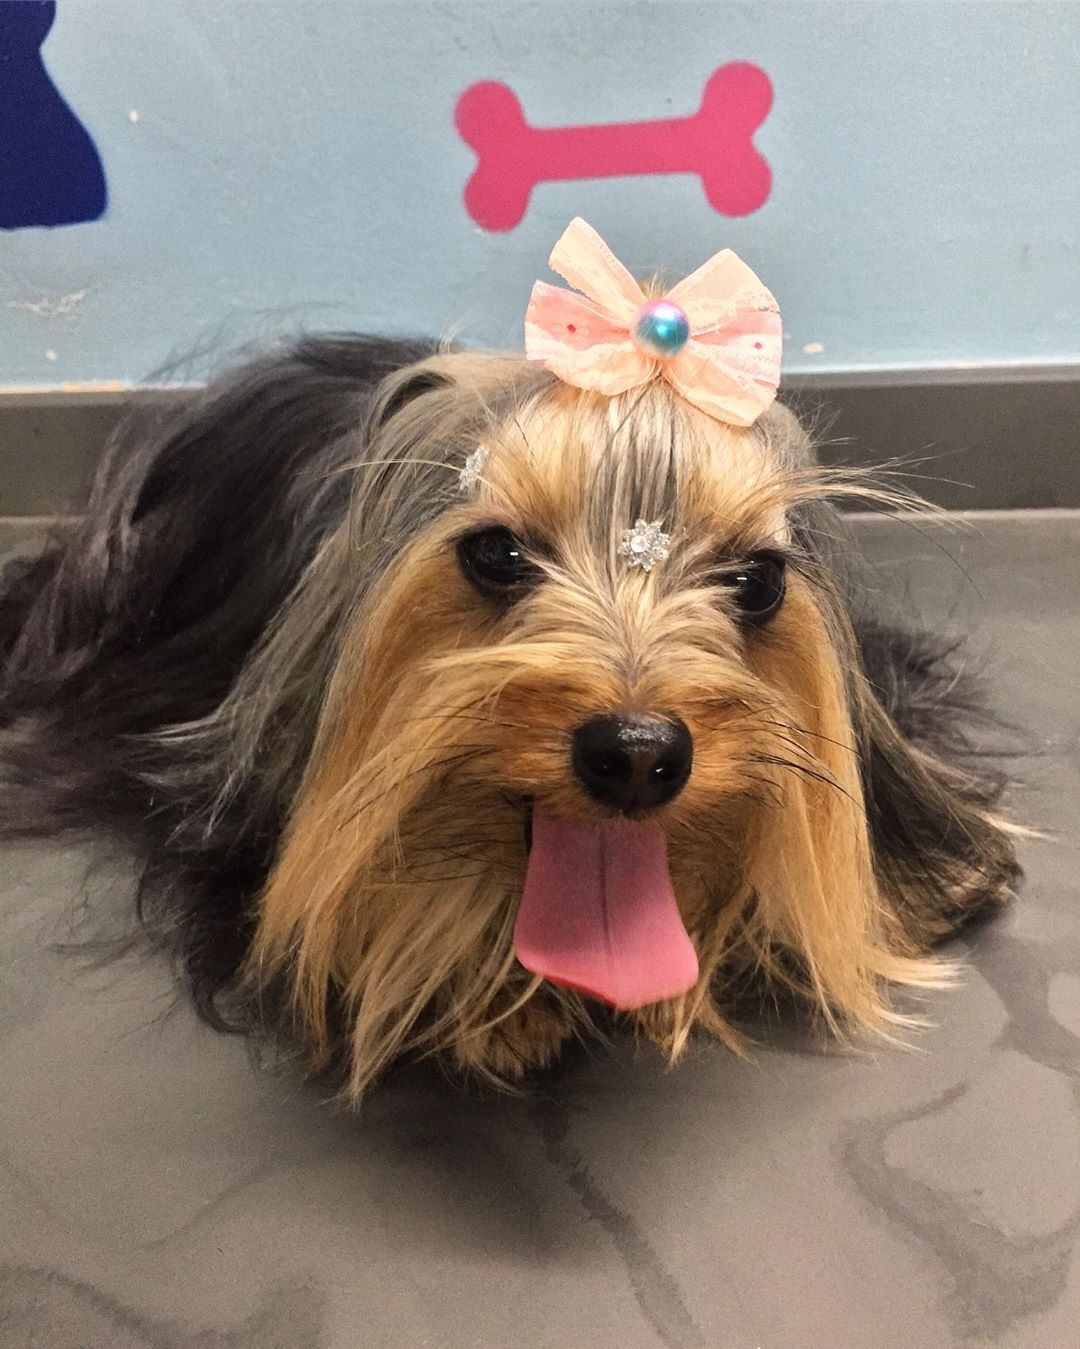 A Yorkshire Terrier wearing a ribbon hair tie while lying on the floor while smiling with its tongue out